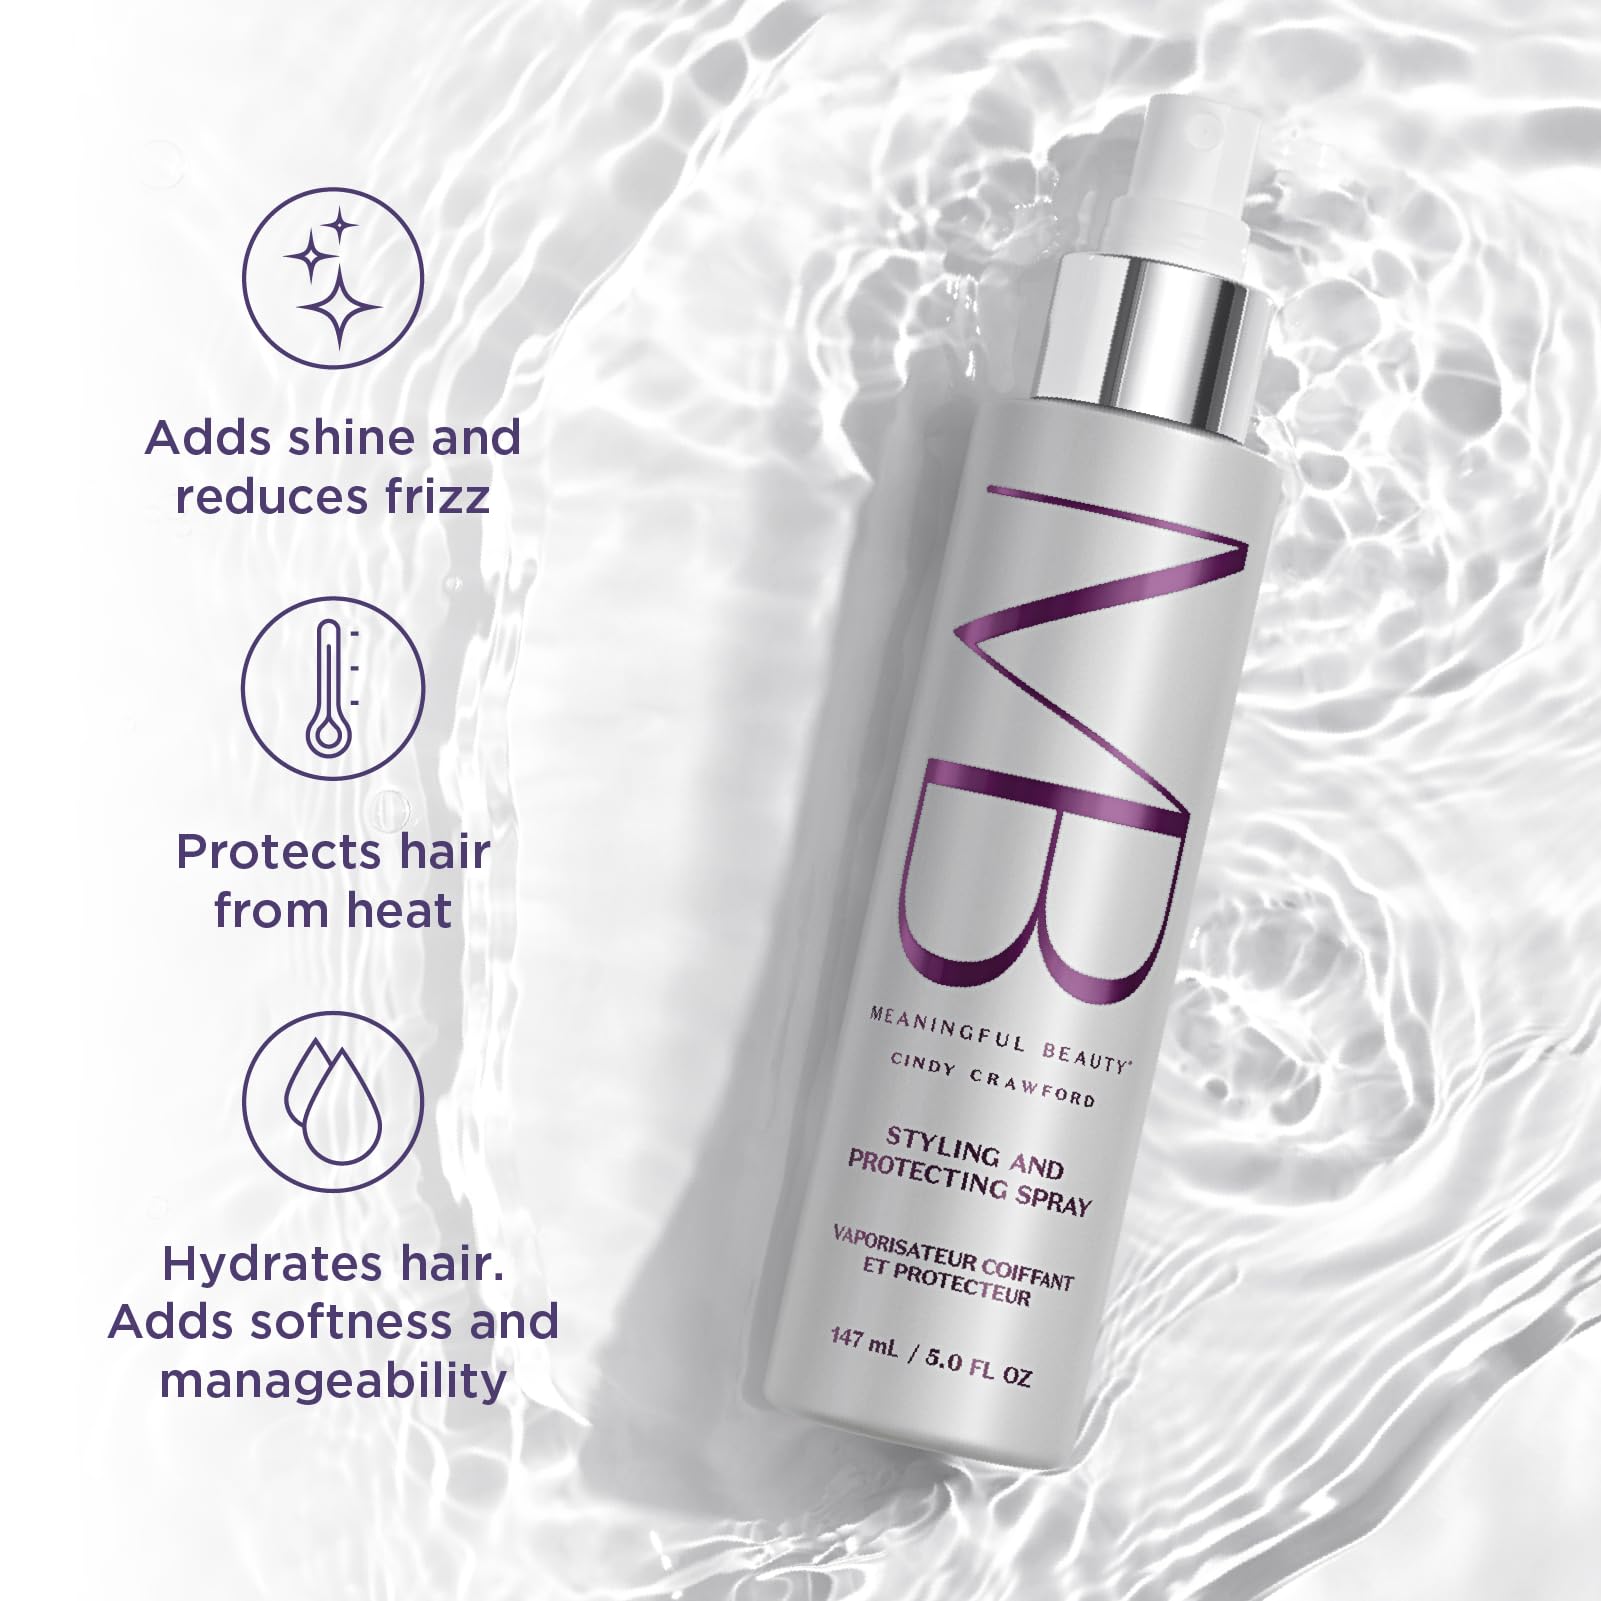 Meaningful Beauty Hair Styling and Protecting Spray